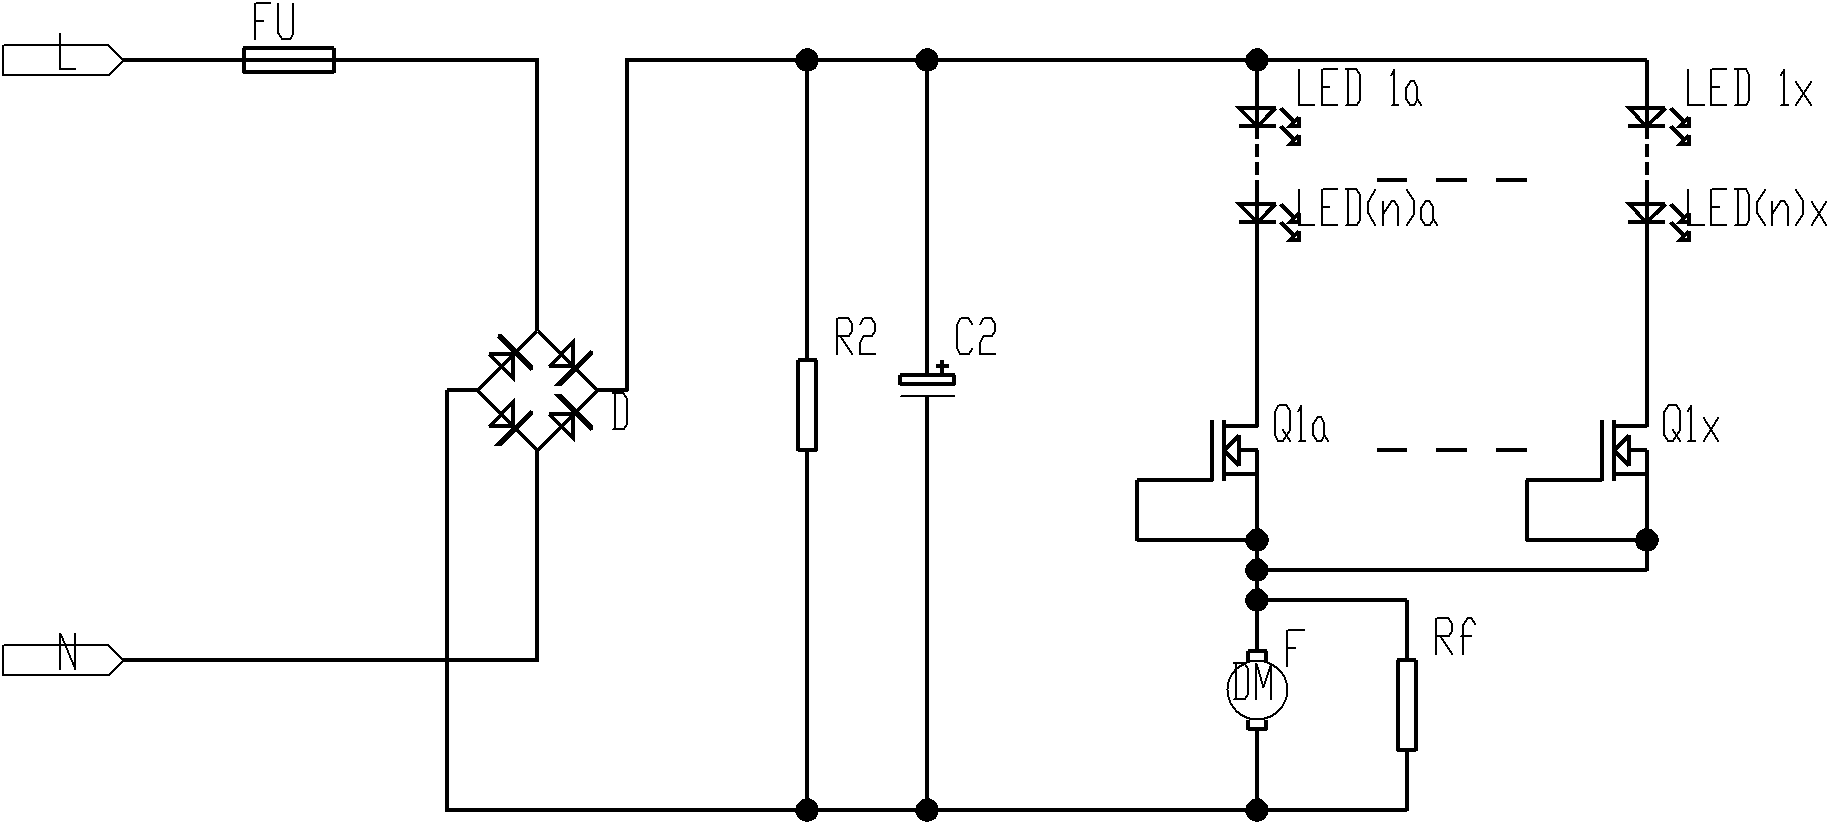 High power factor constant current light-emitting diode (LED) lighting circuit